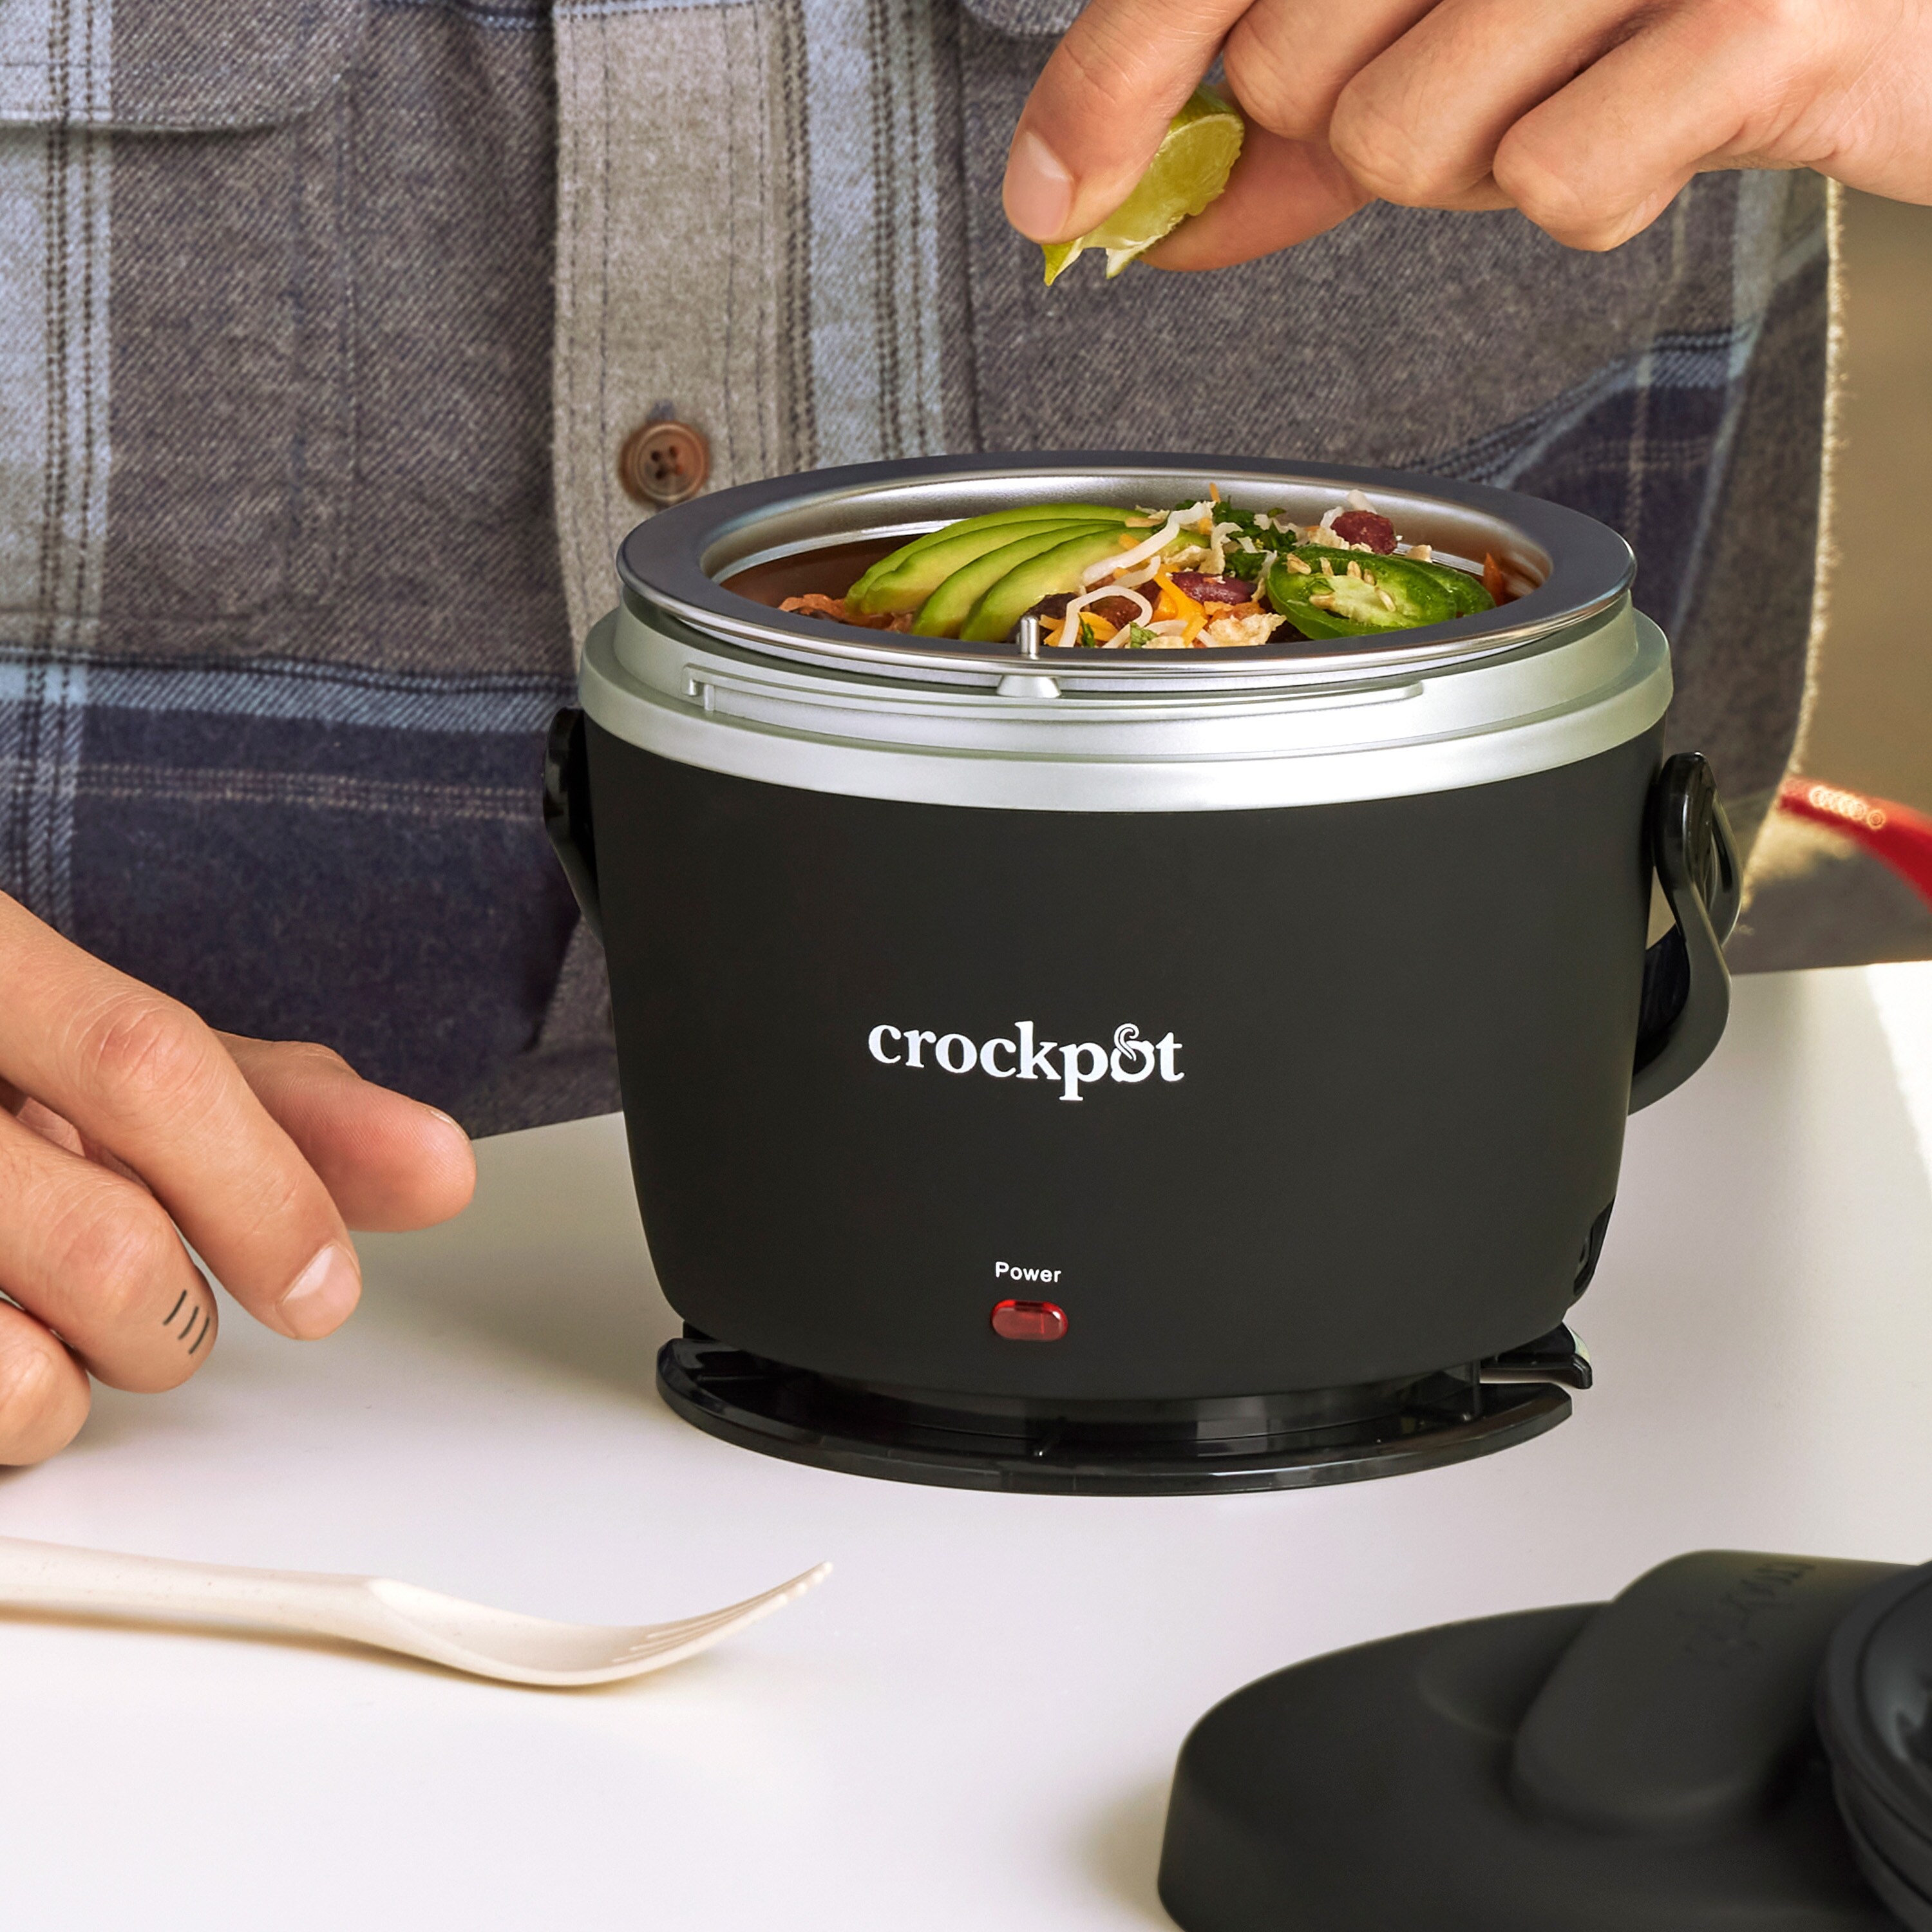 https://ak1.ostkcdn.com/images/products/is/images/direct/a0e15464c75783f3abb0c06d79f2b21bdf3c2df7/Crockpot-20-oz-Lunch-Crock-Food-Warmer-Heated-Lunch-Box-Black-Licorice.jpg